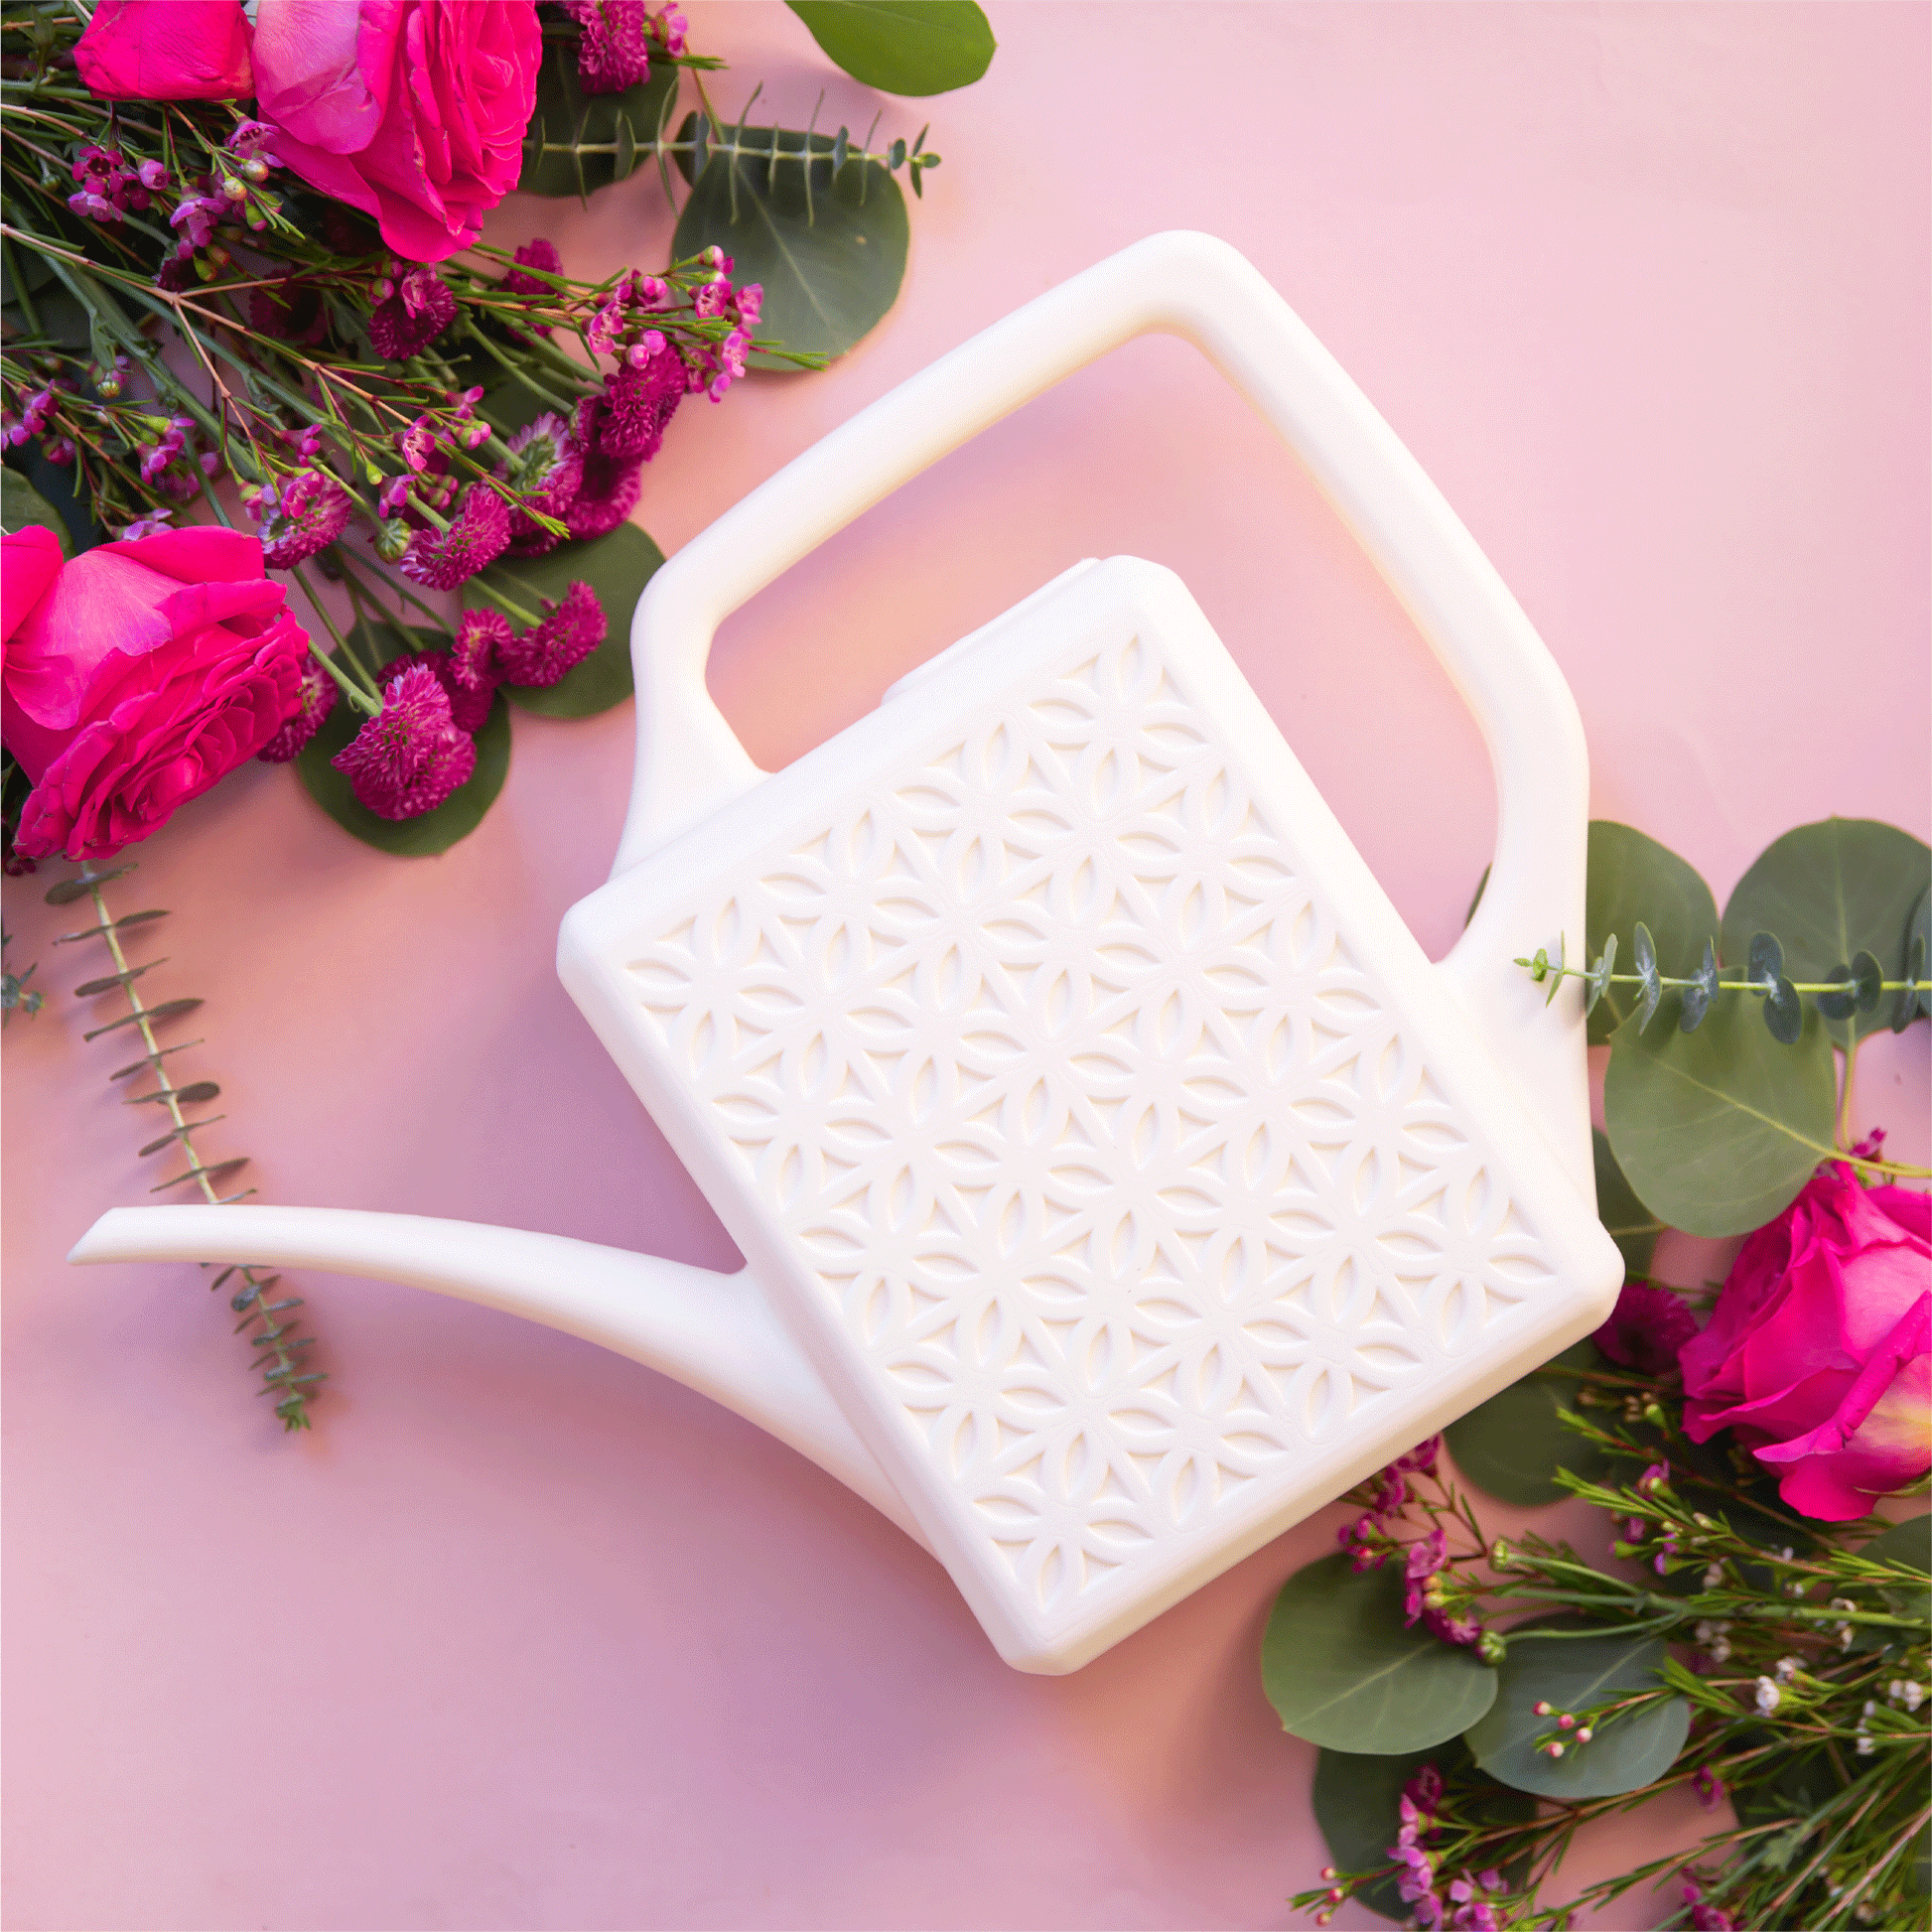 On a pink background is a white watering can with a long spout and a breeze block design on the side.